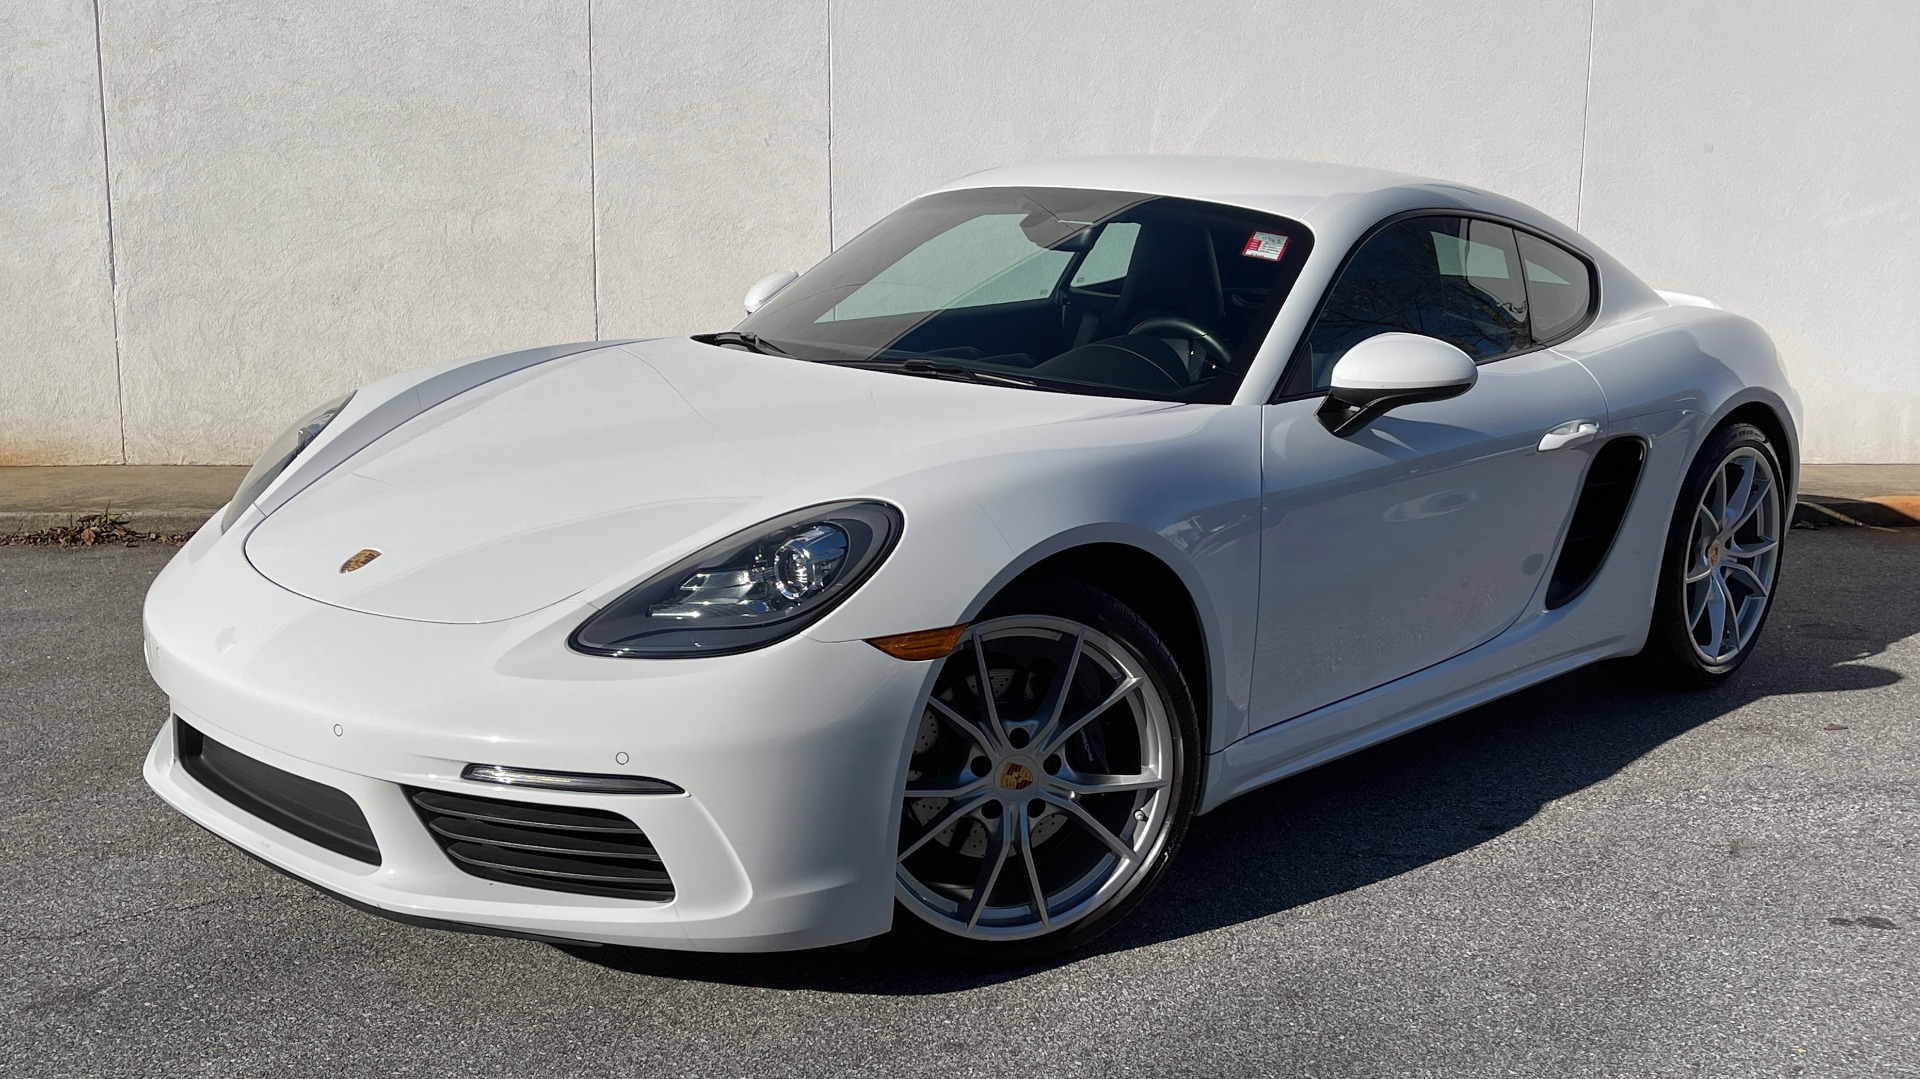 Used 2017 Porsche 718 CAYMAN COUPE / 2.0L TURBO / 6-SPD MANUAL / BOSE / 20-INCH WHEELS for sale $49,395 at Formula Imports in Charlotte NC 28227 5